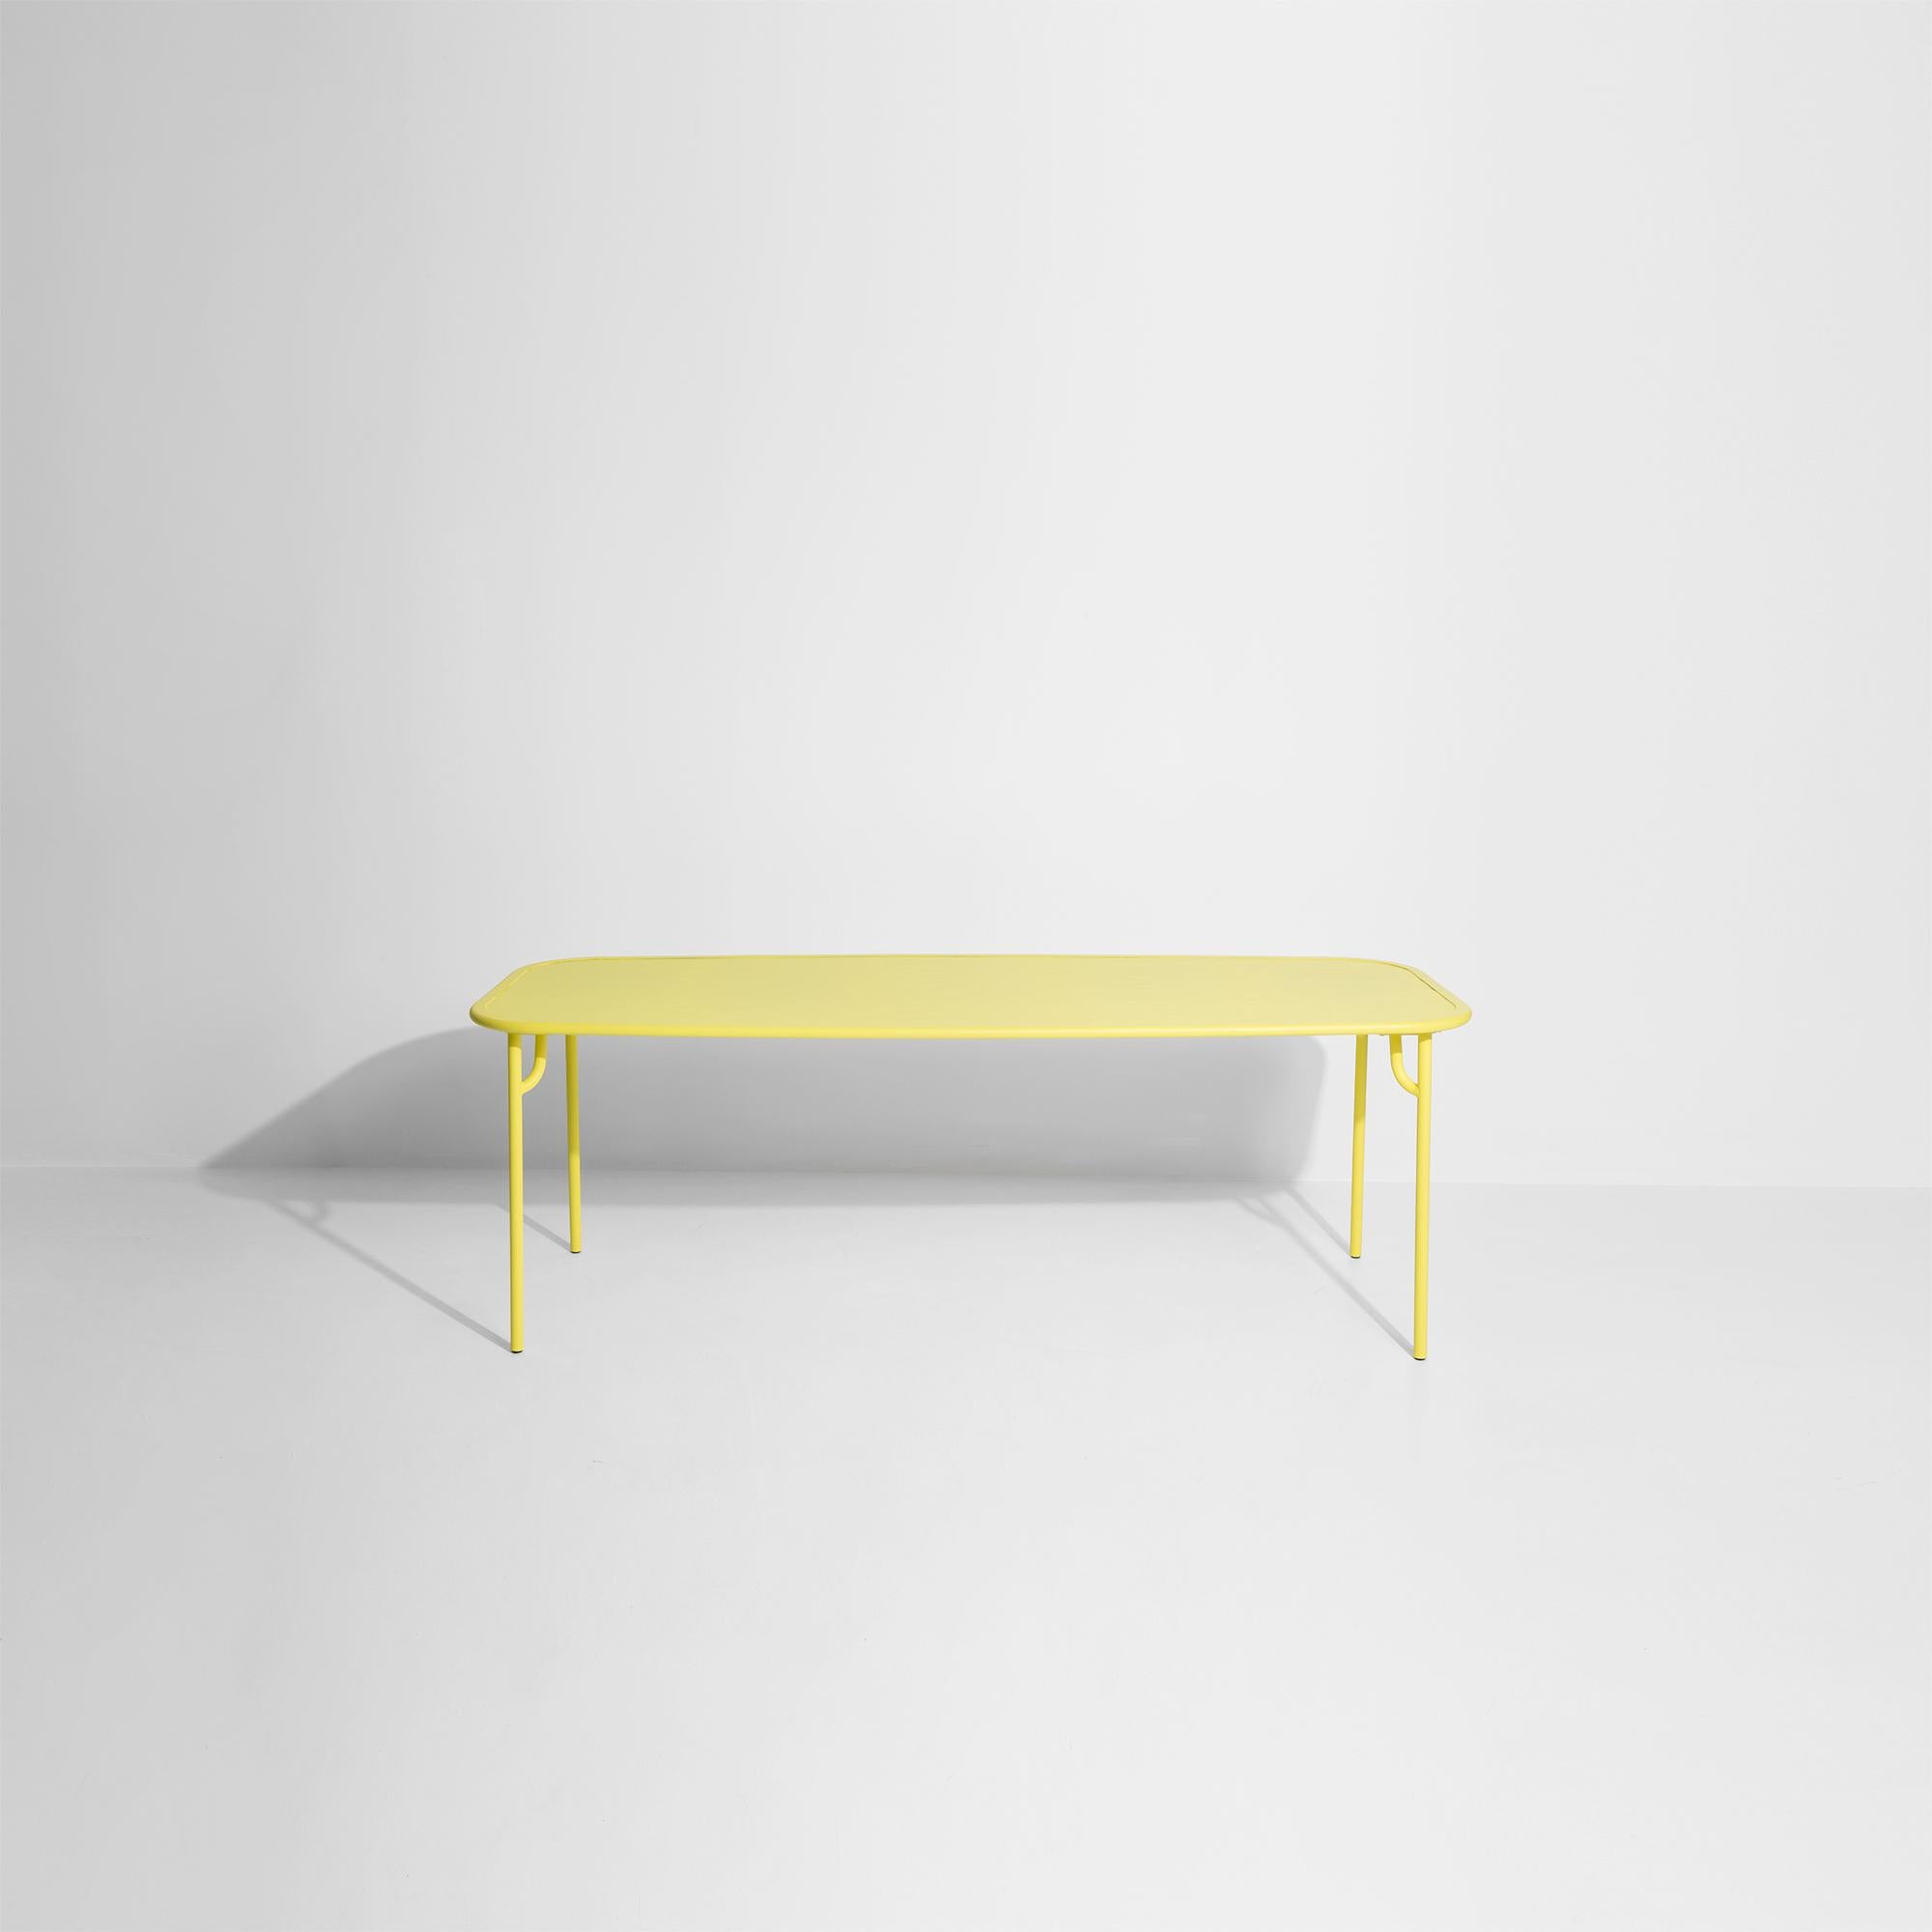 Petite Friture Week-End Large Plain Rectangular Dining Table in Yellow Aluminium In New Condition For Sale In Brooklyn, NY